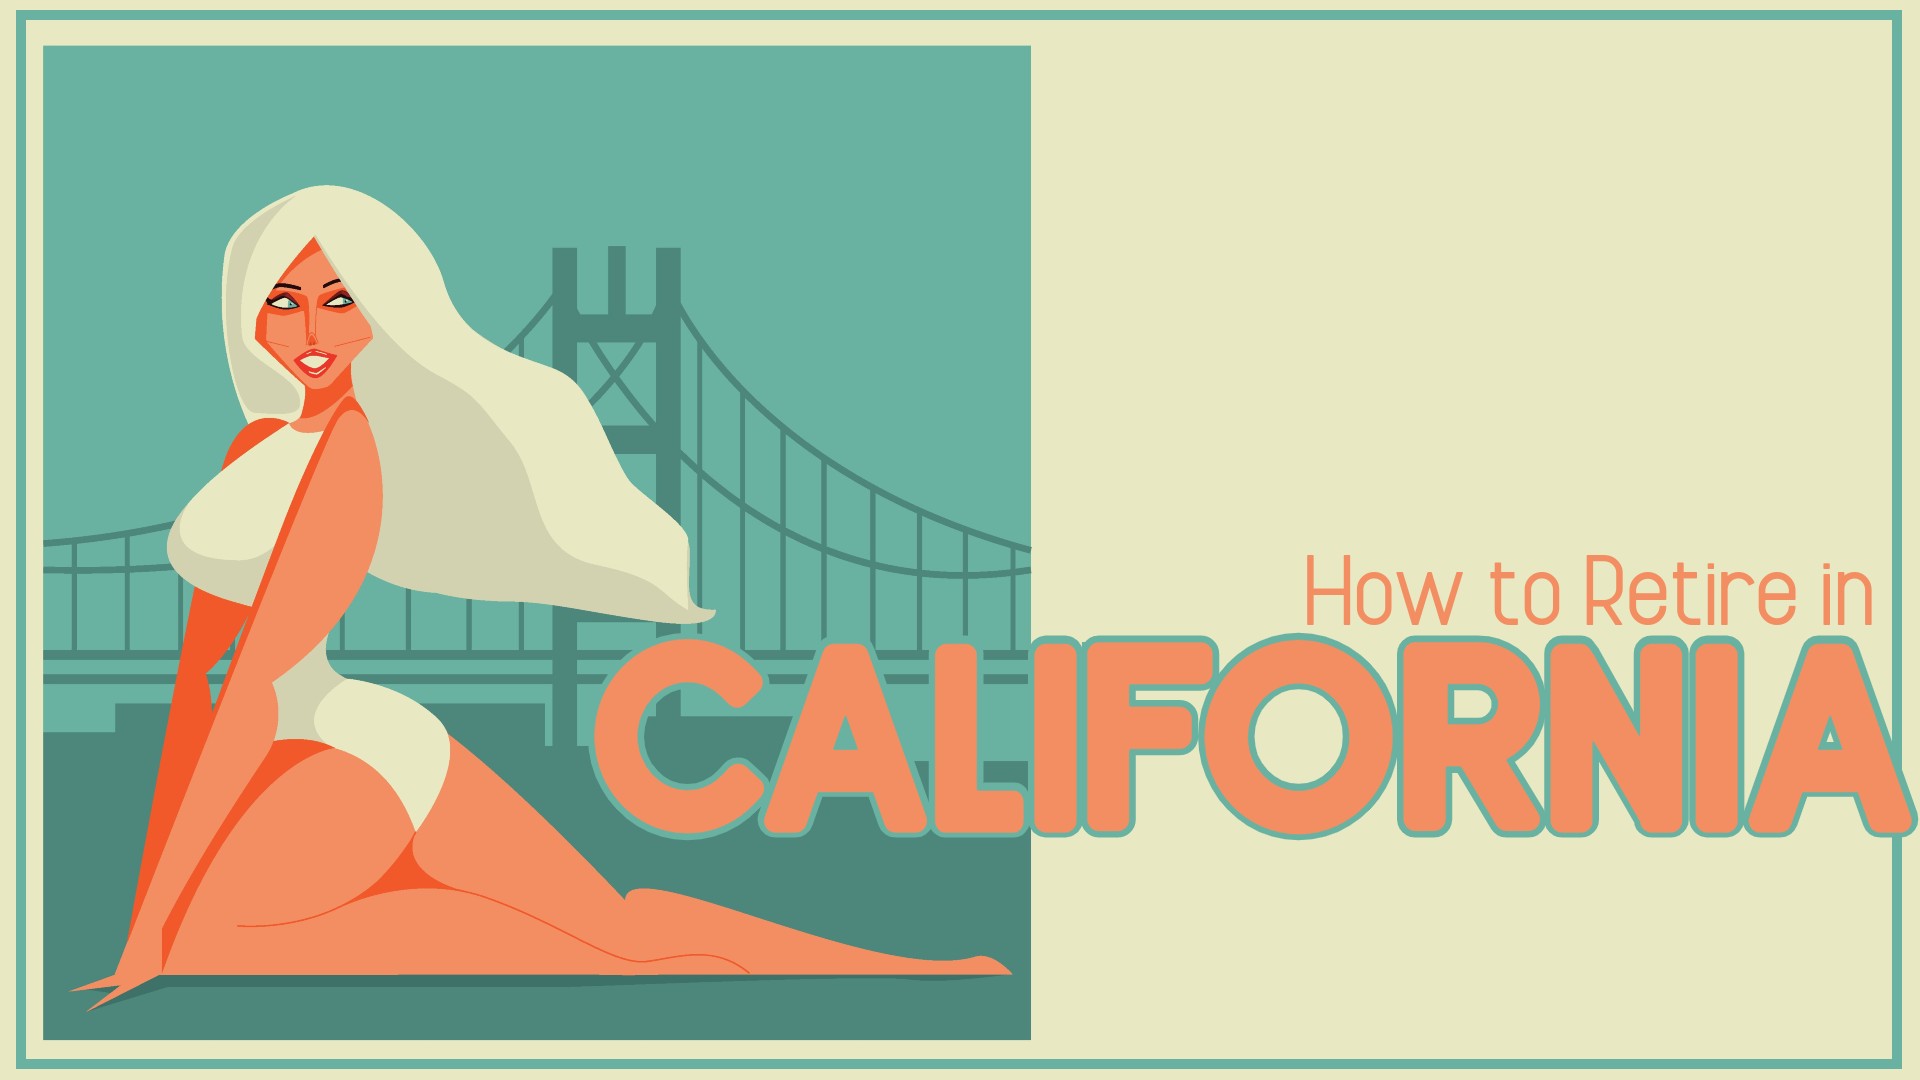 How to Retire in California